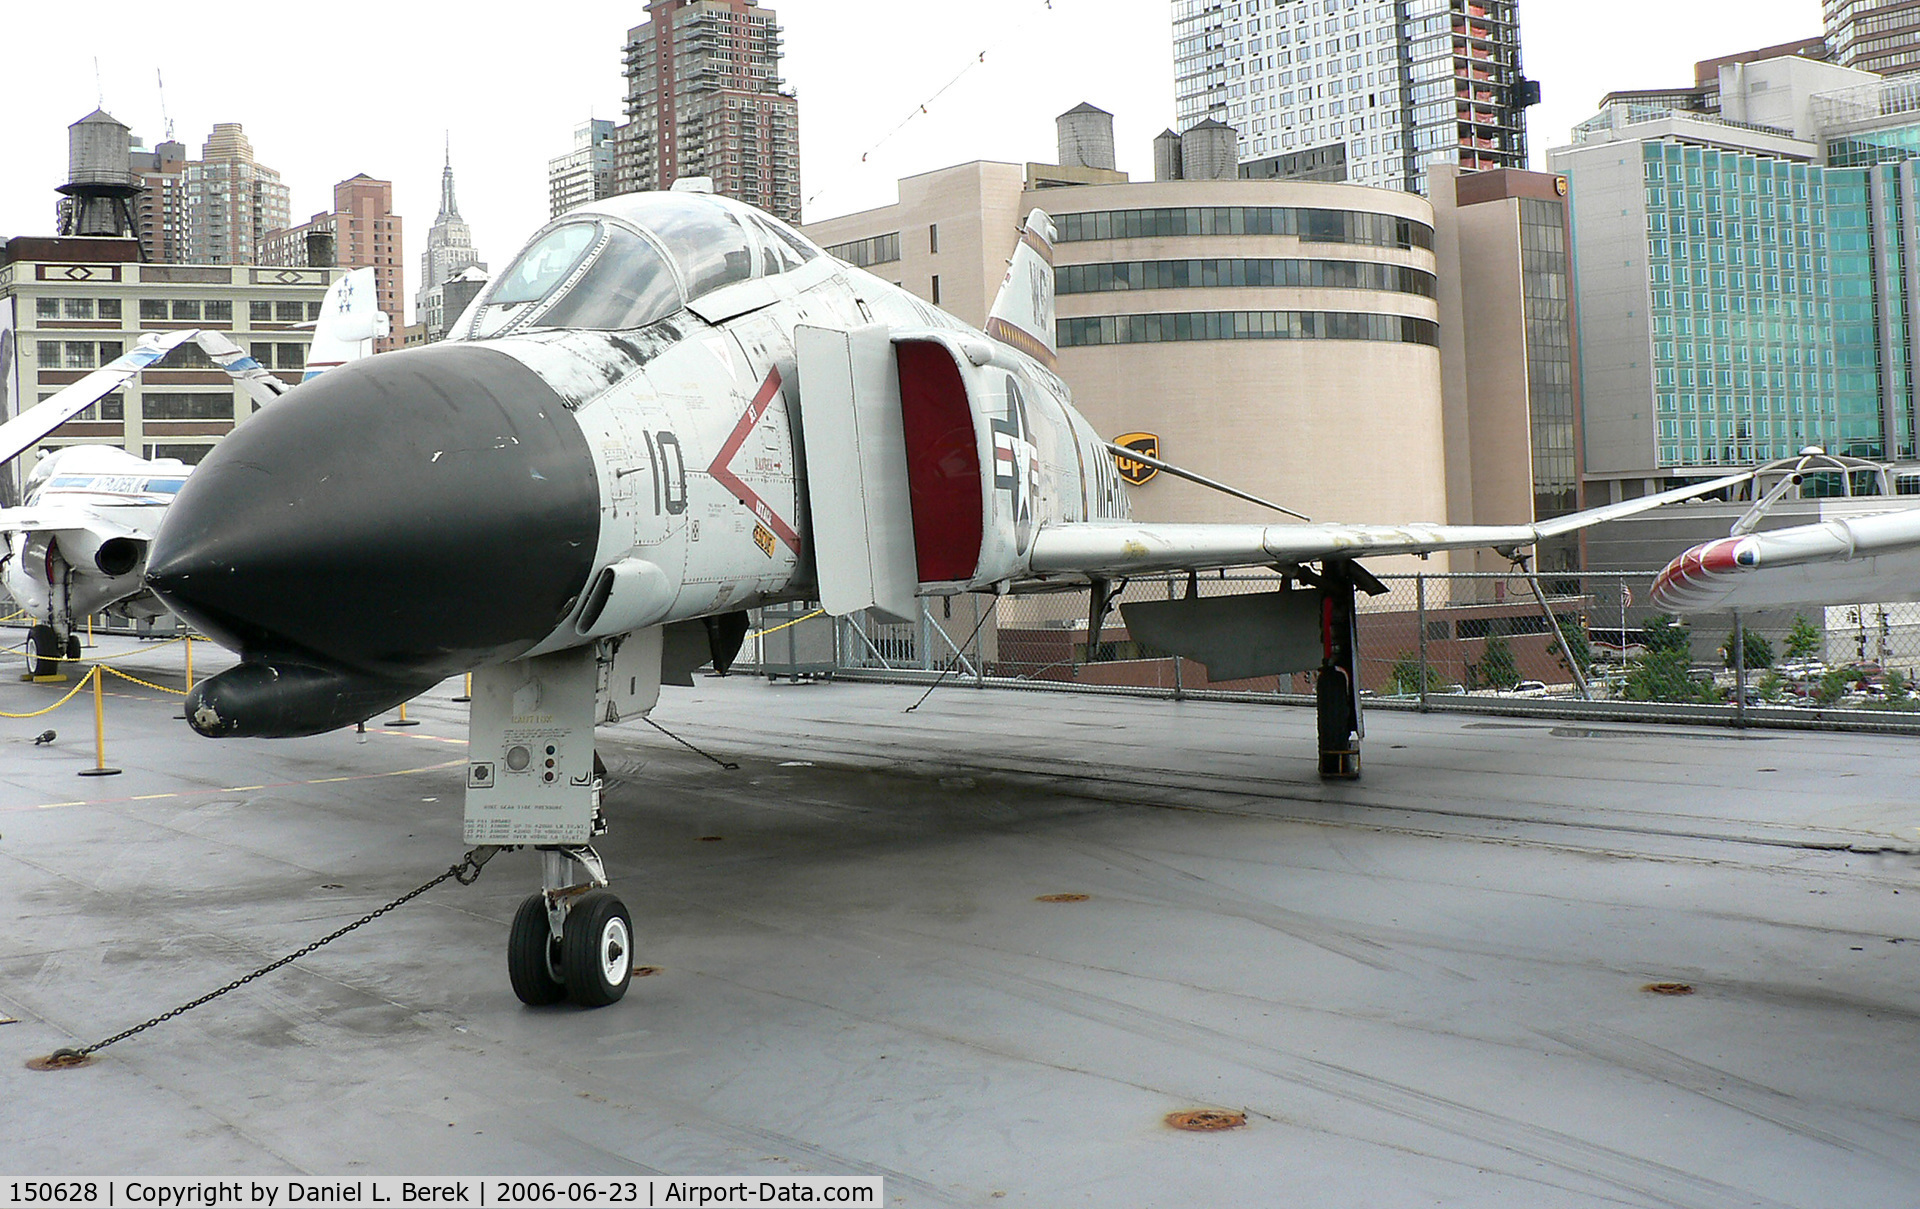 150628, McDonnell F-4N Phantom II C/N 286, This aircraft started out as an F-4B but was converted to an F-4N.  Currently aboard the USS Intrepid, she is on loan from the National Museum of Naval Aviation.